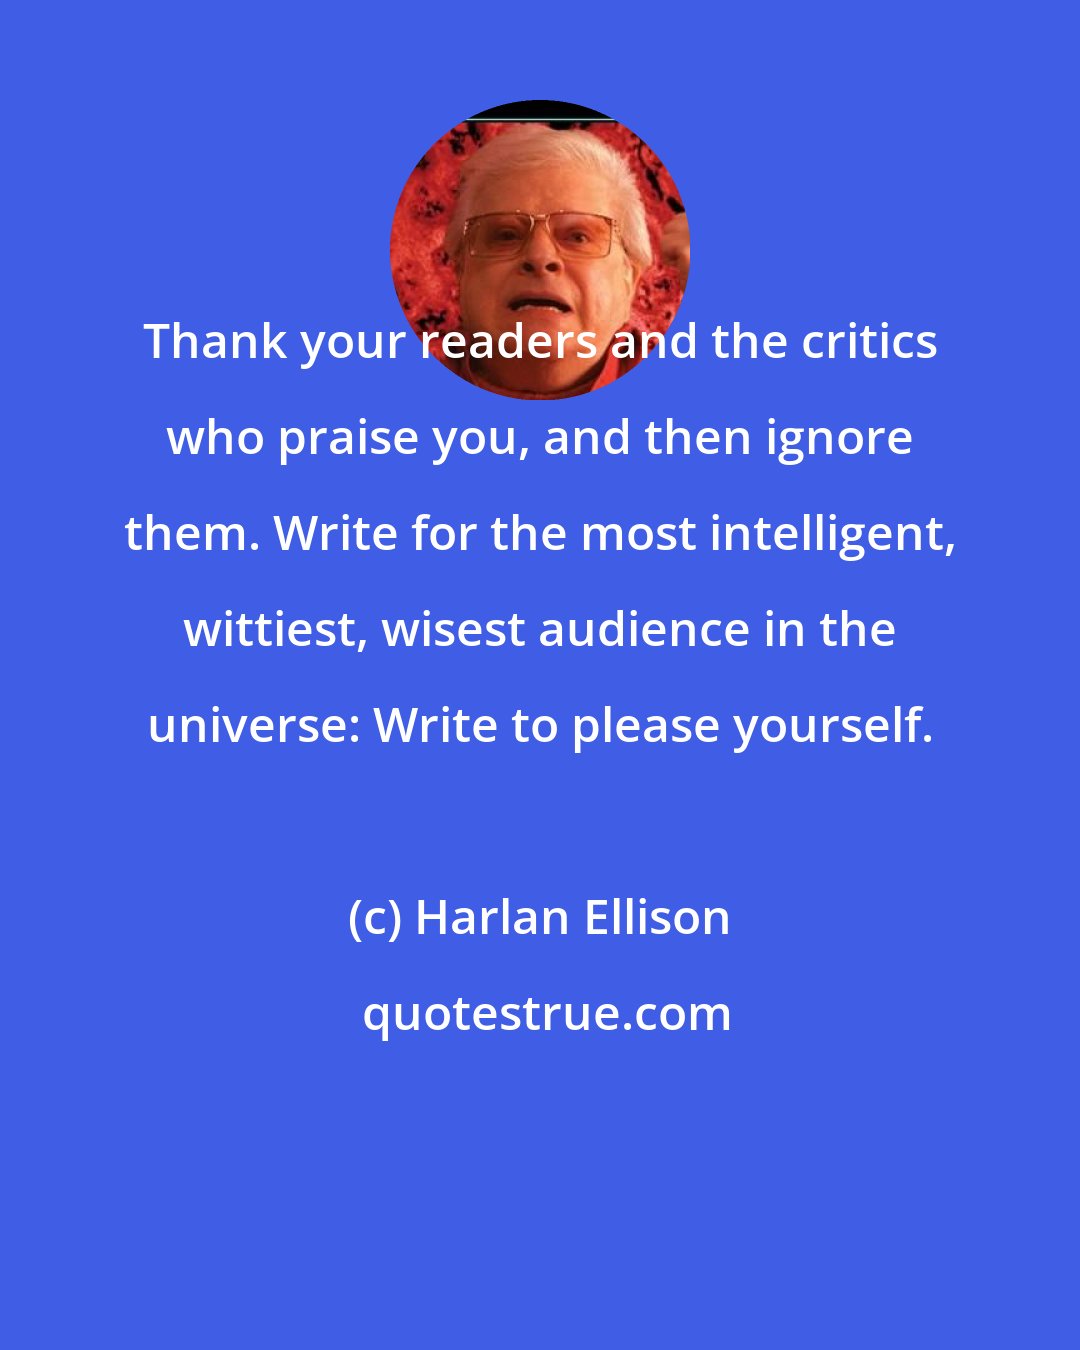 Harlan Ellison: Thank your readers and the critics who praise you, and then ignore them. Write for the most intelligent, wittiest, wisest audience in the universe: Write to please yourself.